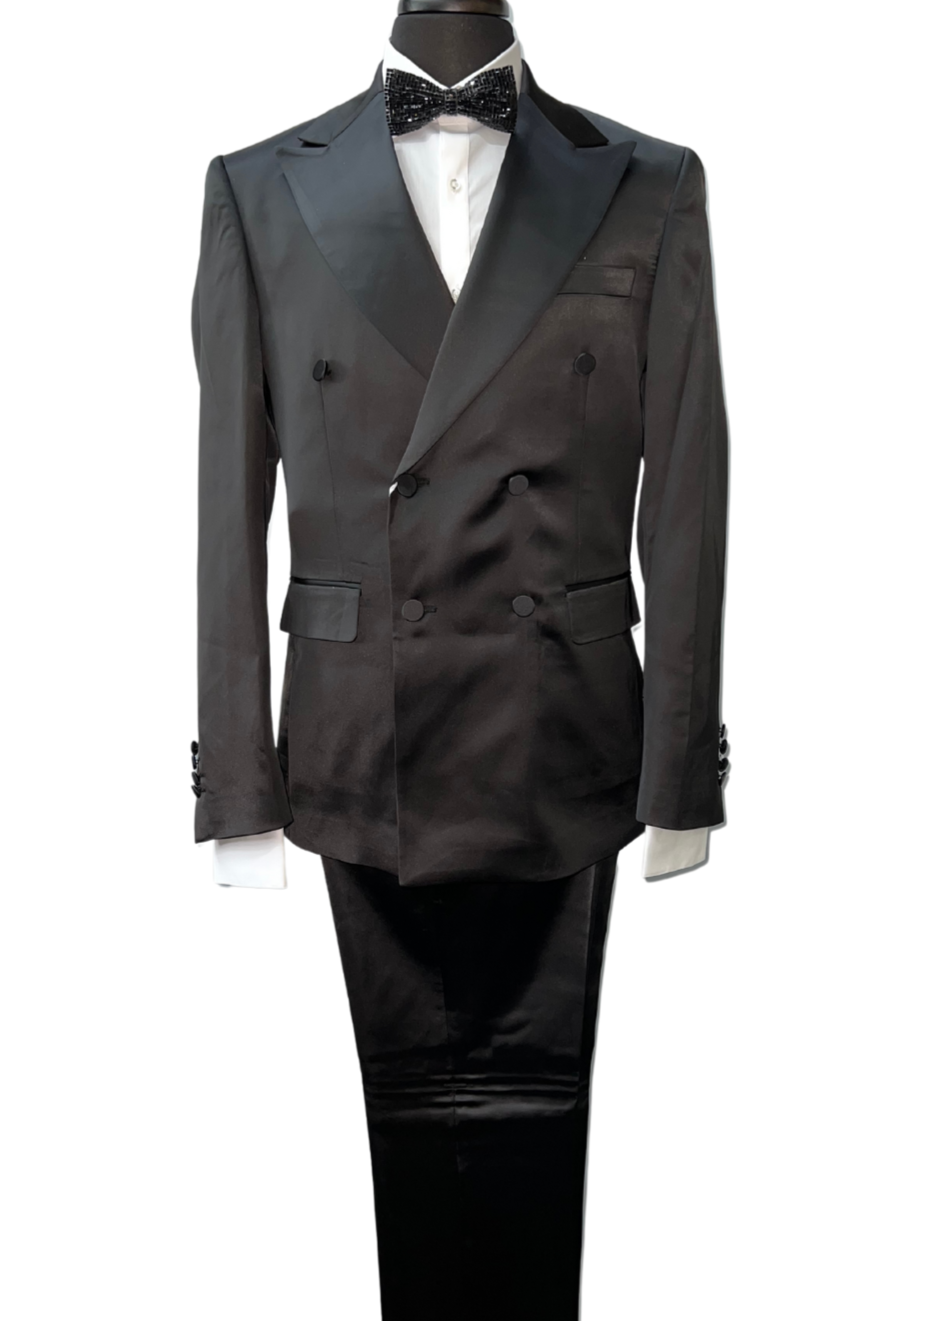 Biarelli Double Breasted Black Satin Suit